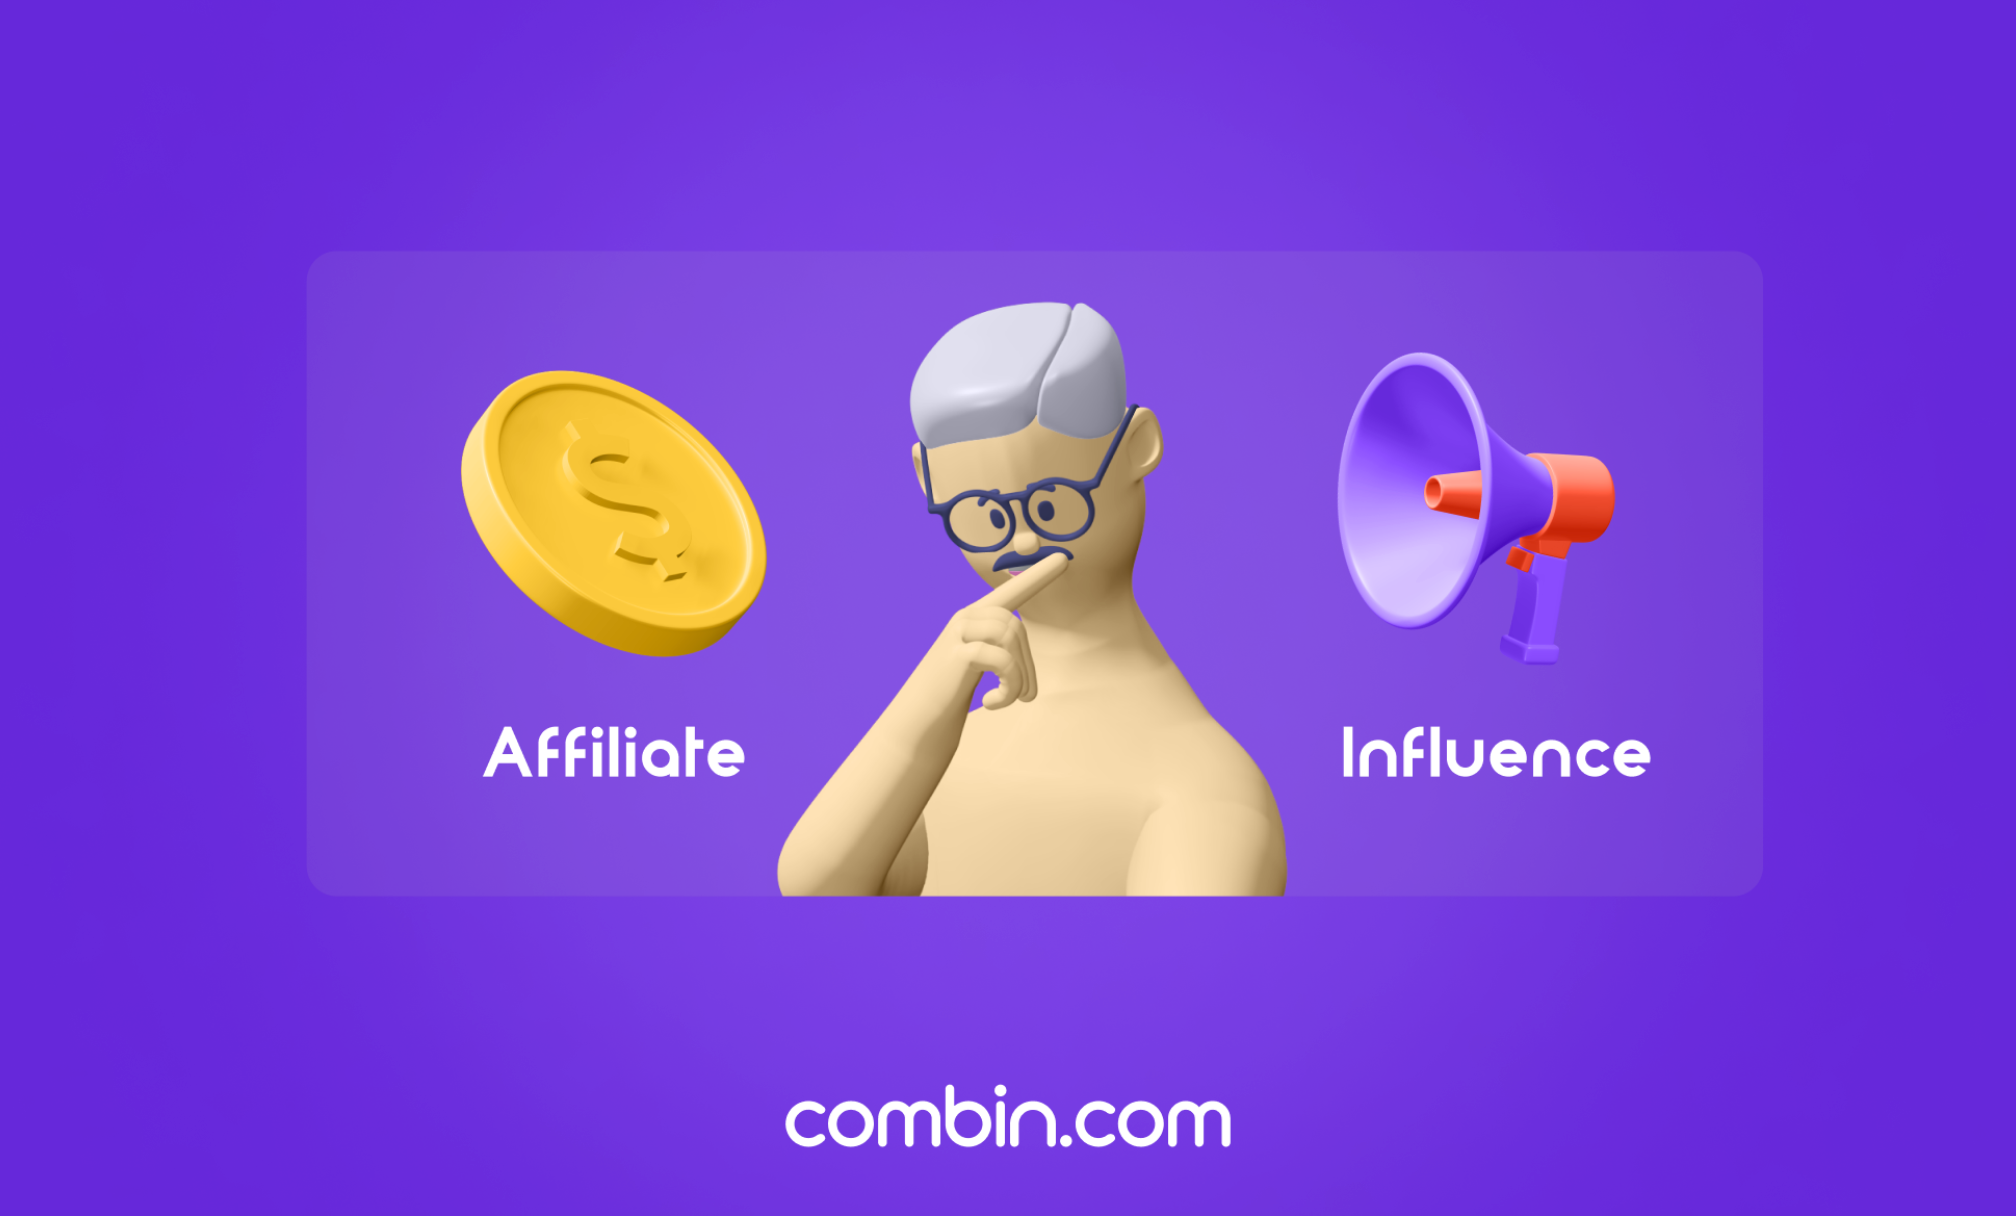 Affiliate Marketing vs Influencer Marketing: What’s The Difference